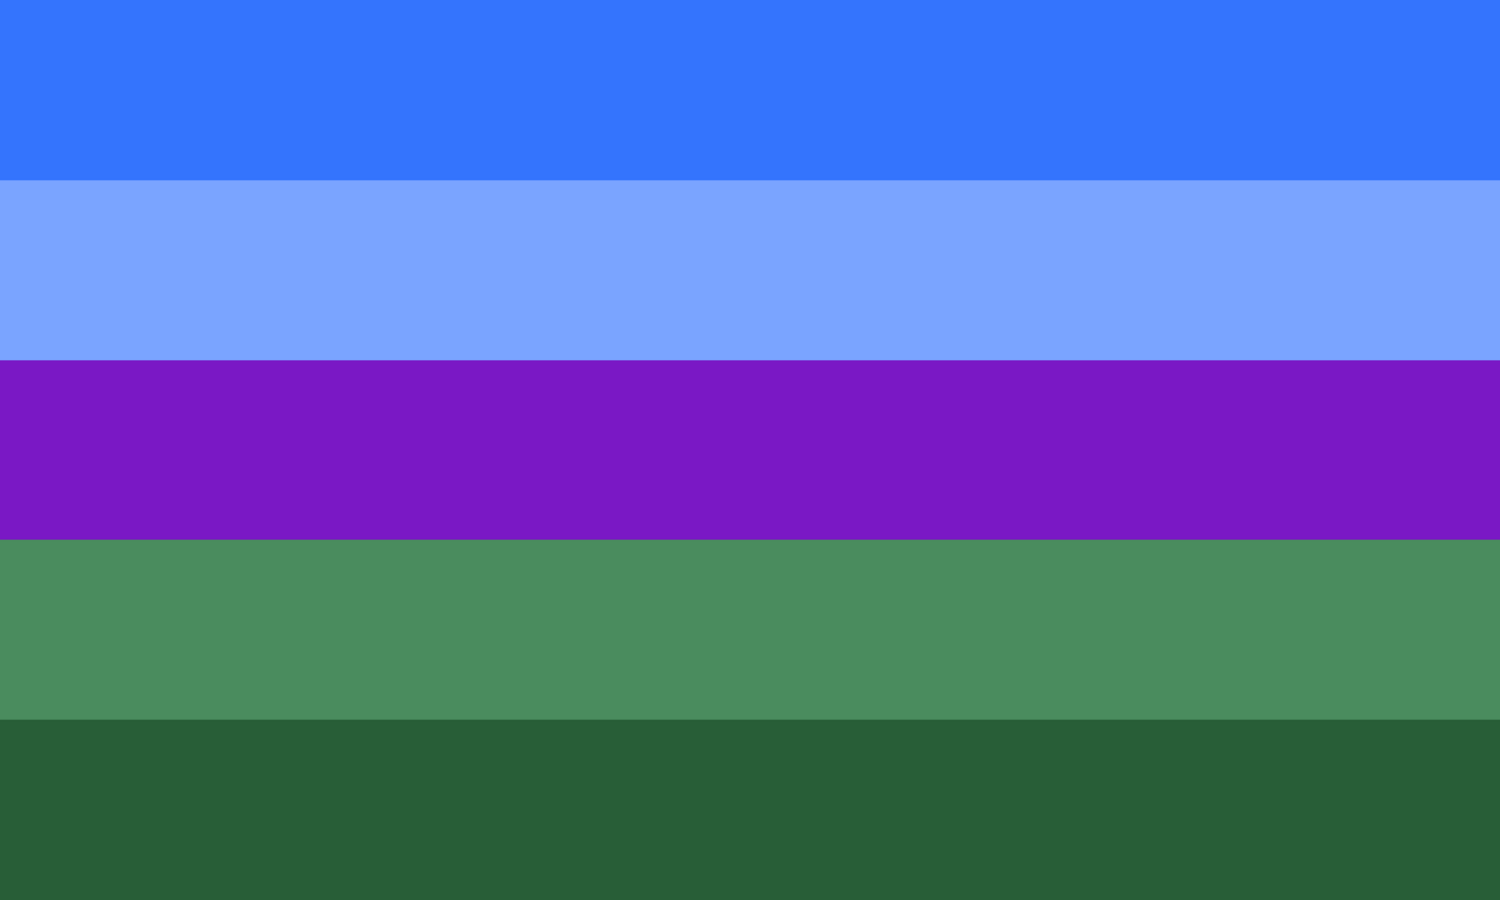 The established Salmacian flag. It is a rectangle with five horizontal stripes. The first stripe is medium blue; the second, light blue; the third, purple; the fourth, light green; and the fifth, medium green.